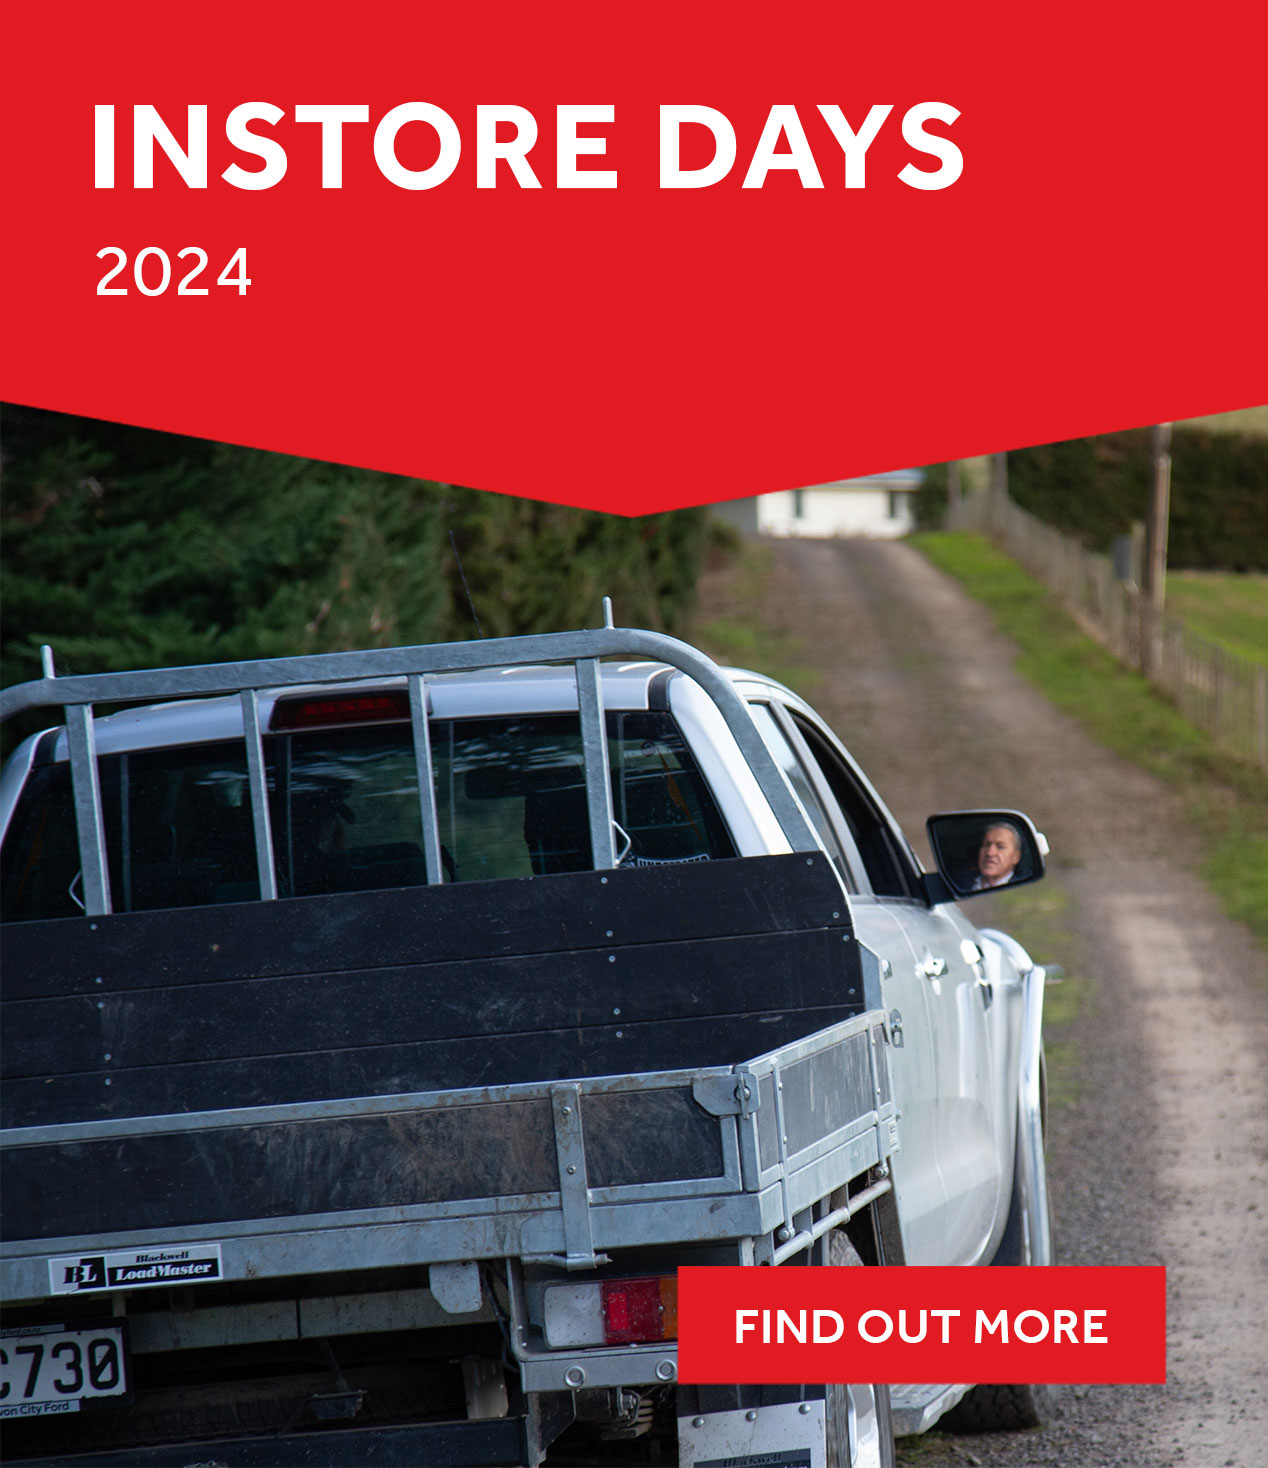 Find out more about Instore Days 2024